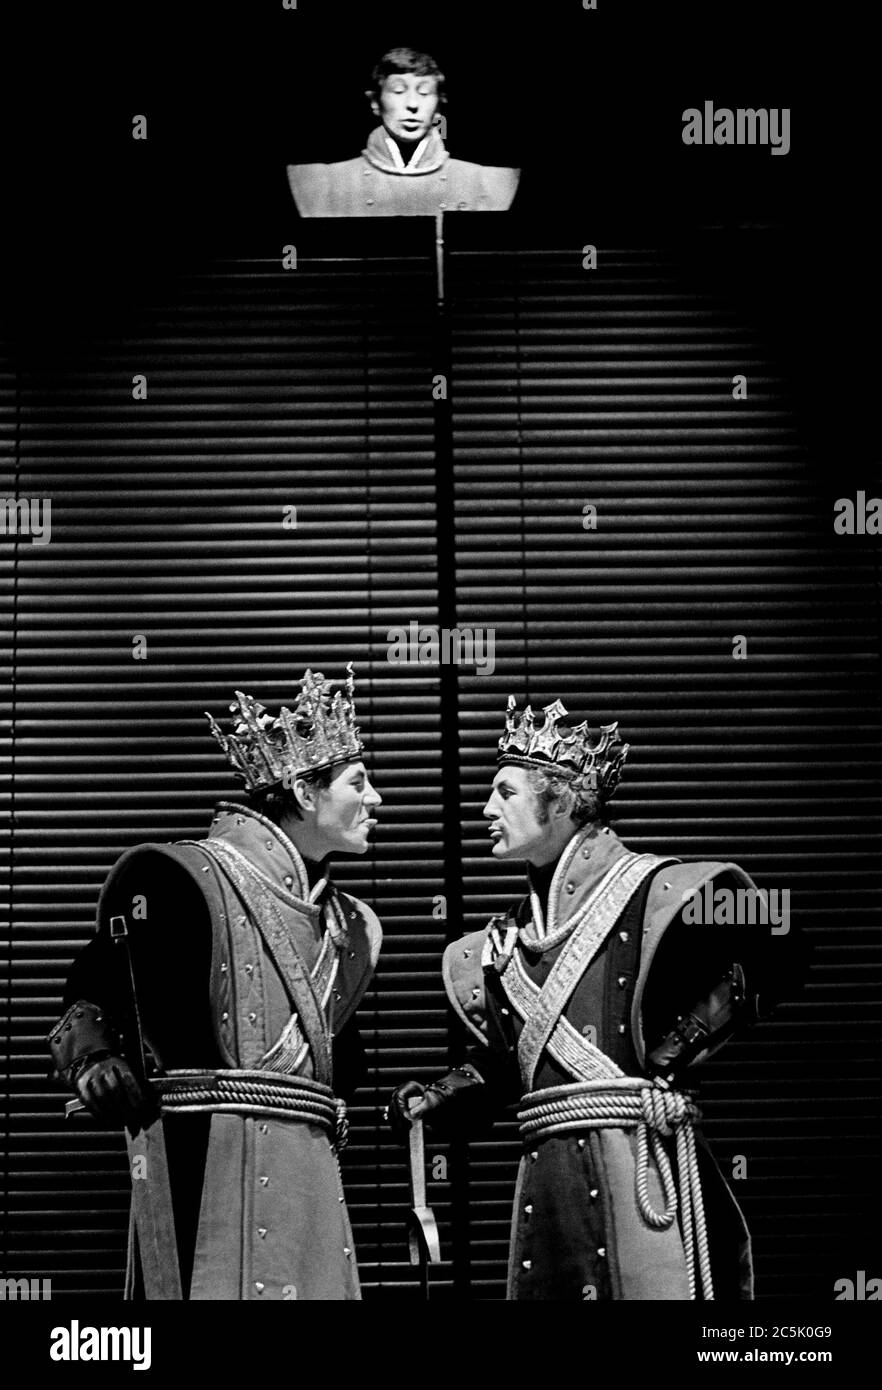 l-r: Patrick Stewart (King John), Peter Needham (King Philip of France) with (above) Michael McGovern (Citizen of Angiers) in KING JOHN by Shakespeare at the Royal Shakespeare Company (RSC) /Theatre-go-round 1970  director: Buzz Goodbody Stock Photo